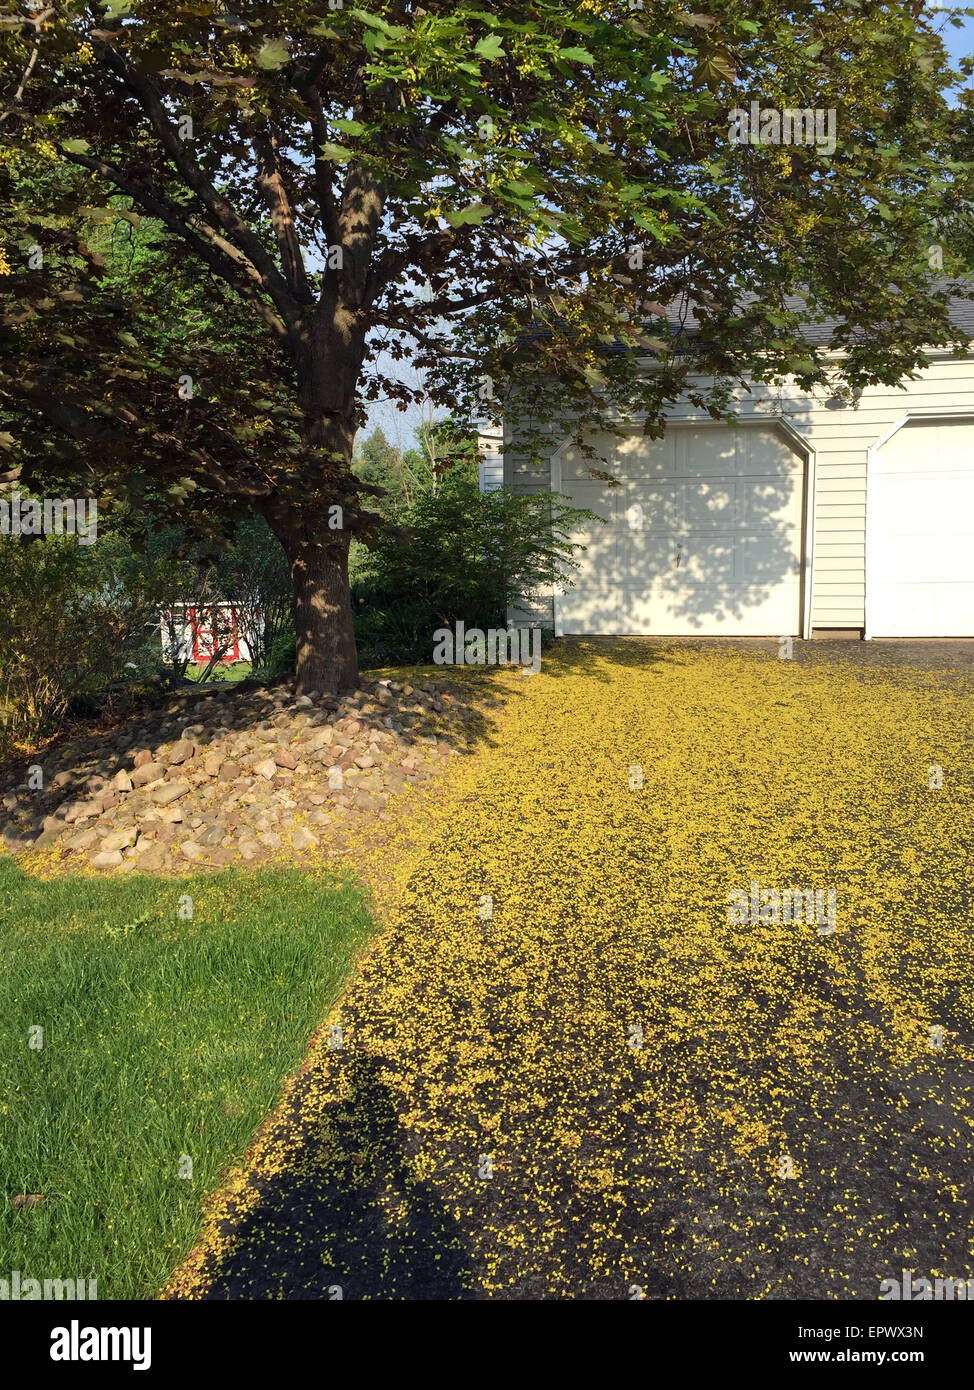 Driveway covered with yellow flowers. Stock Photo